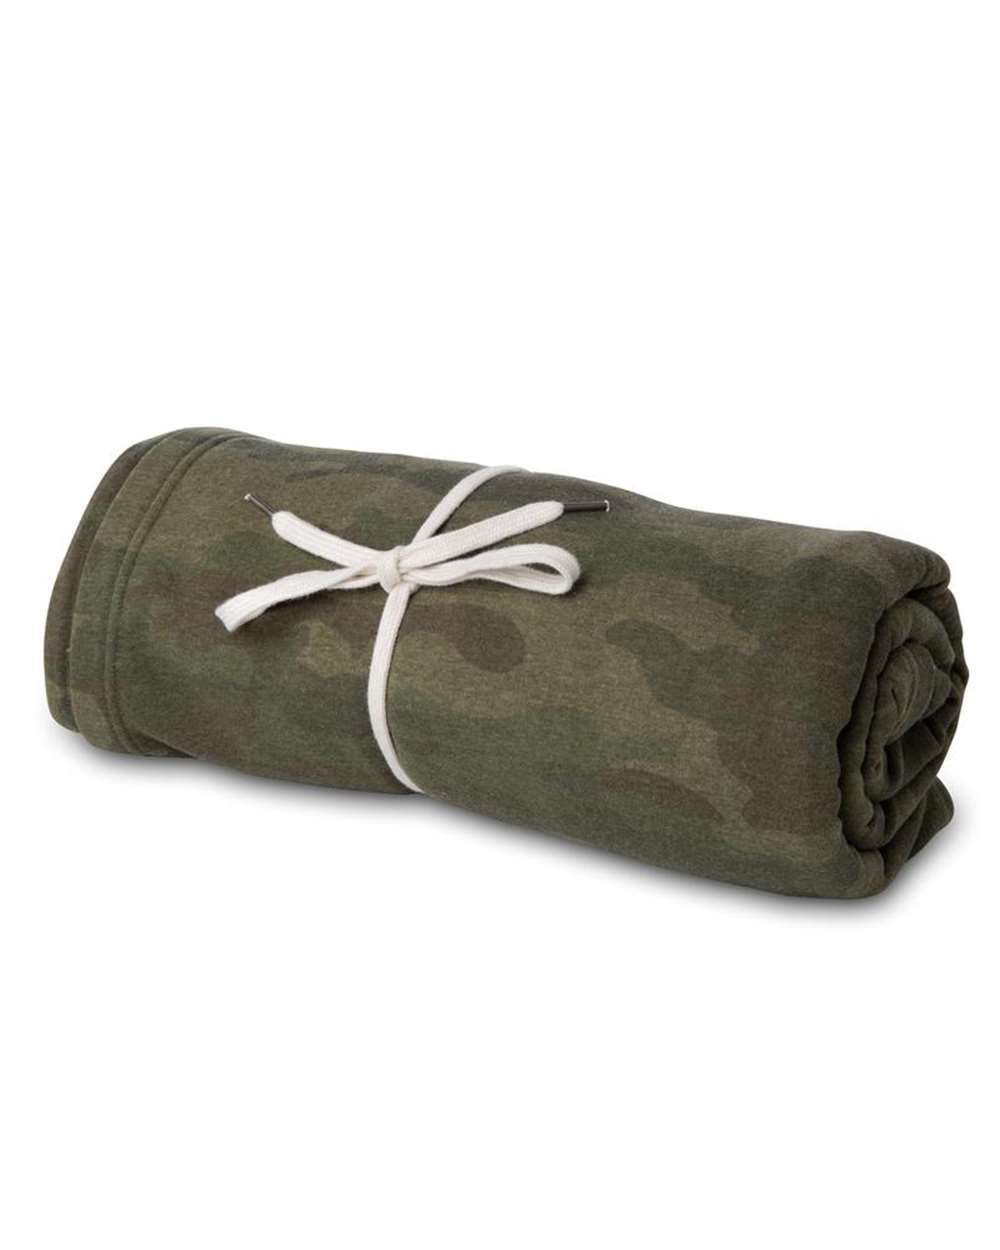 Details about    Velvet Blanket Multi-layered with Casual Blanket Travel Thick Color Towel